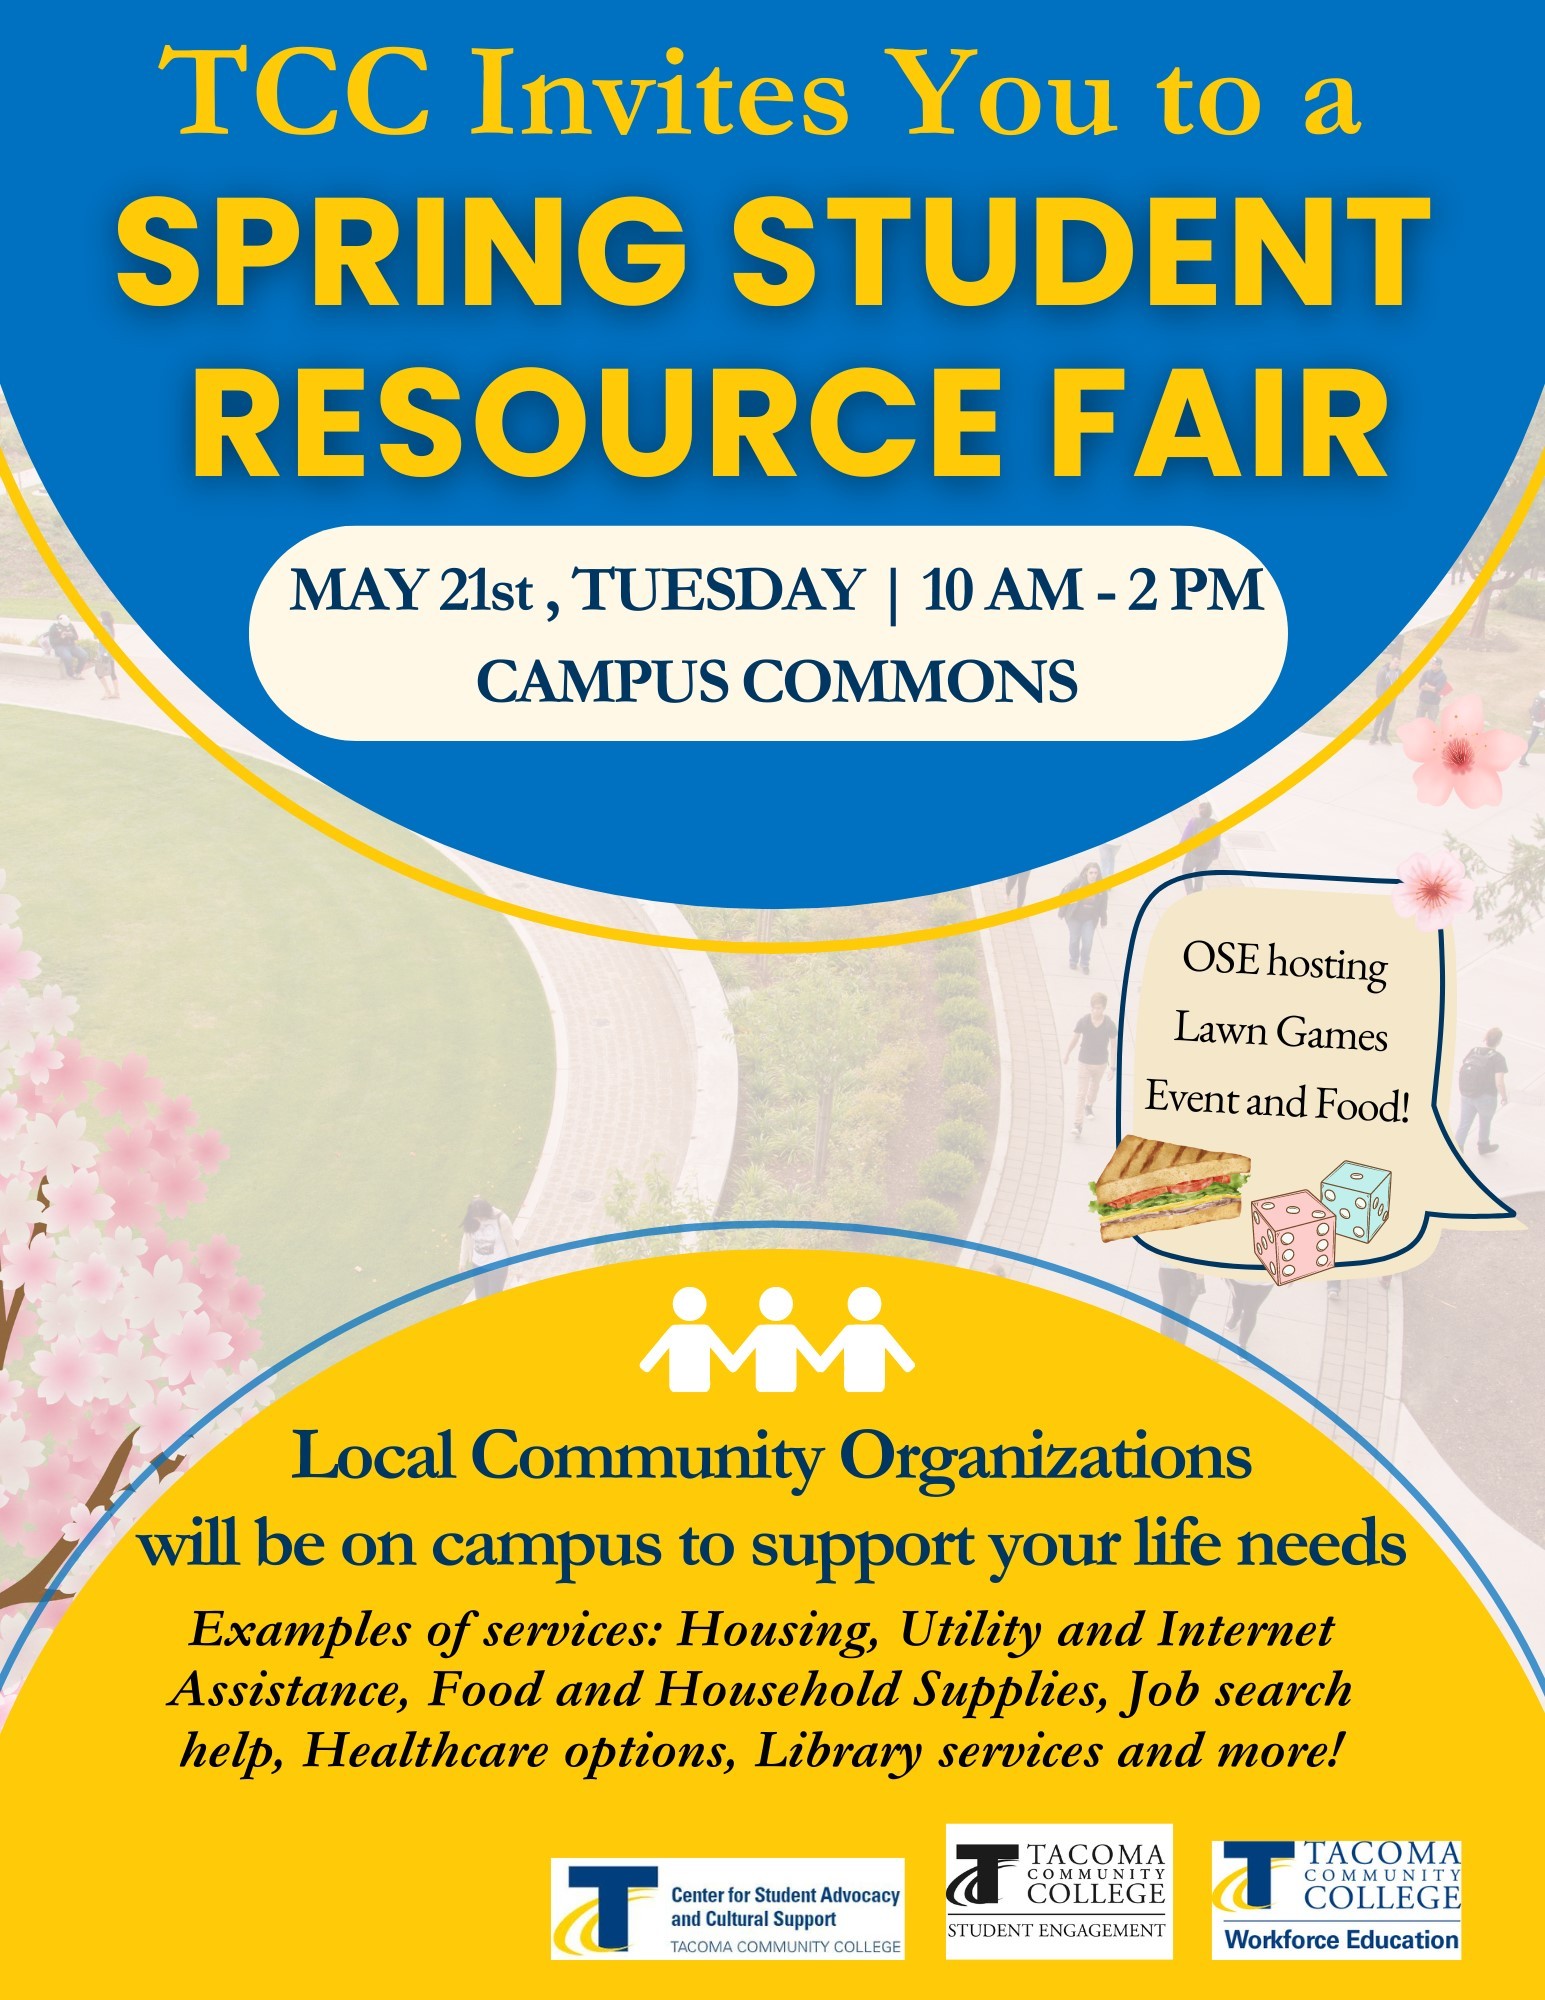 Flyer for Spring Resource Fair, May 21, 10a - 2p in the Campus Commons. Local community organizations will be on campus to support your life needs. 